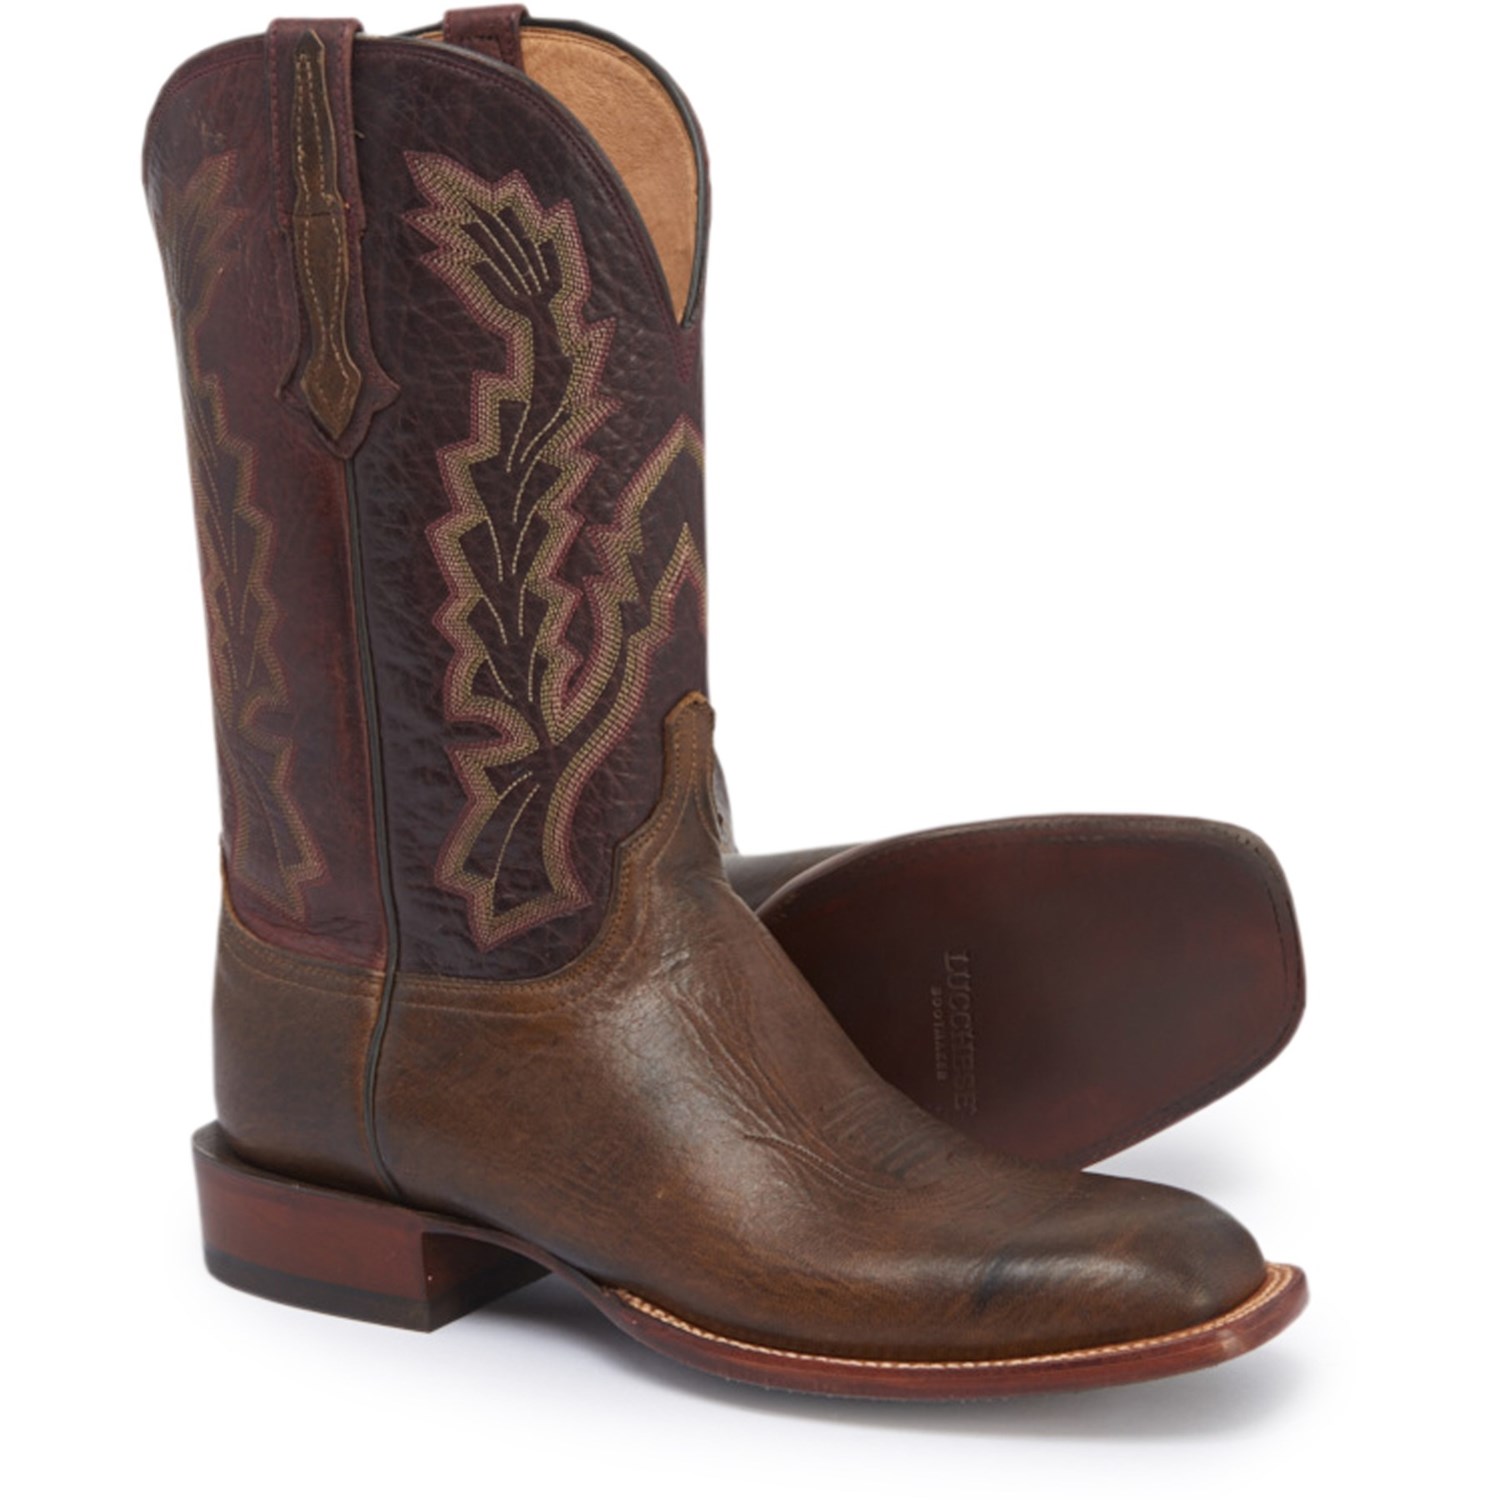 purchase cowboy boots